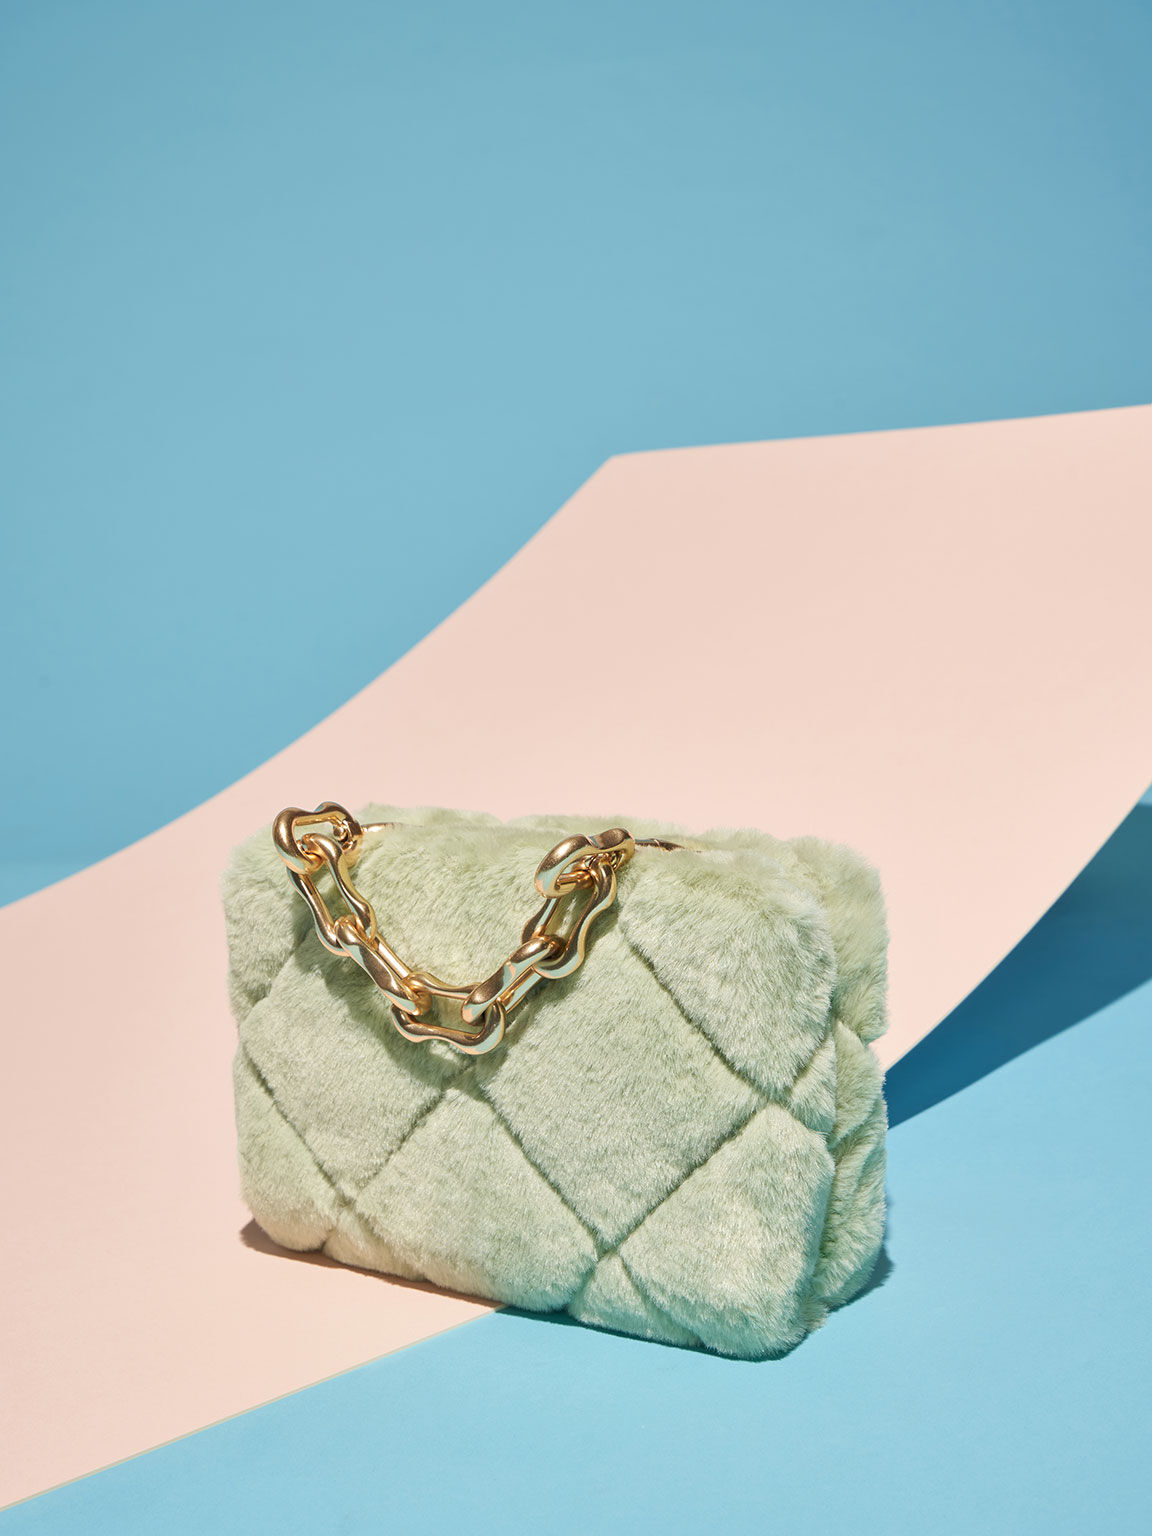 Gemma Chunky Chain Handle Furry Quilted Boxy Bag, Mint Green, hi-res